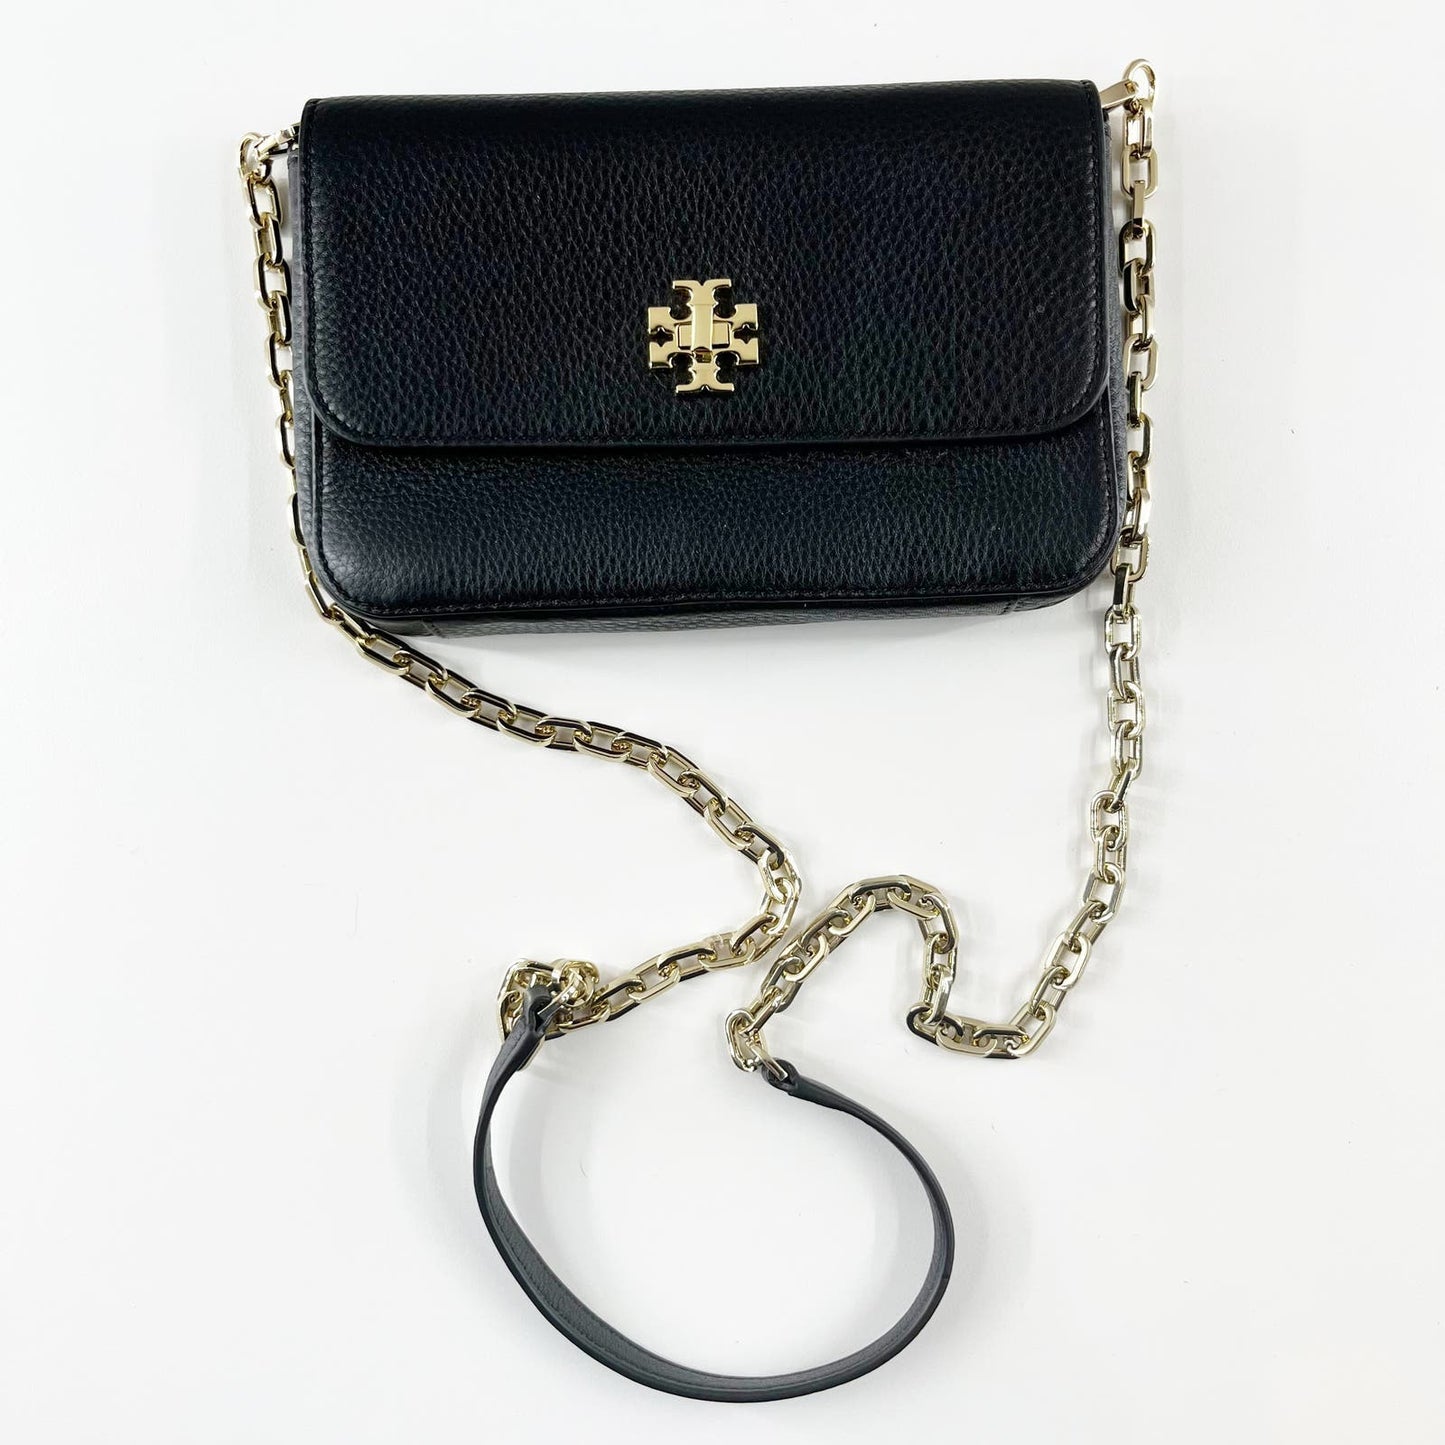 Tory Burch Mercer Pebbled Leather Chain Crossbody Wallet Black Gold